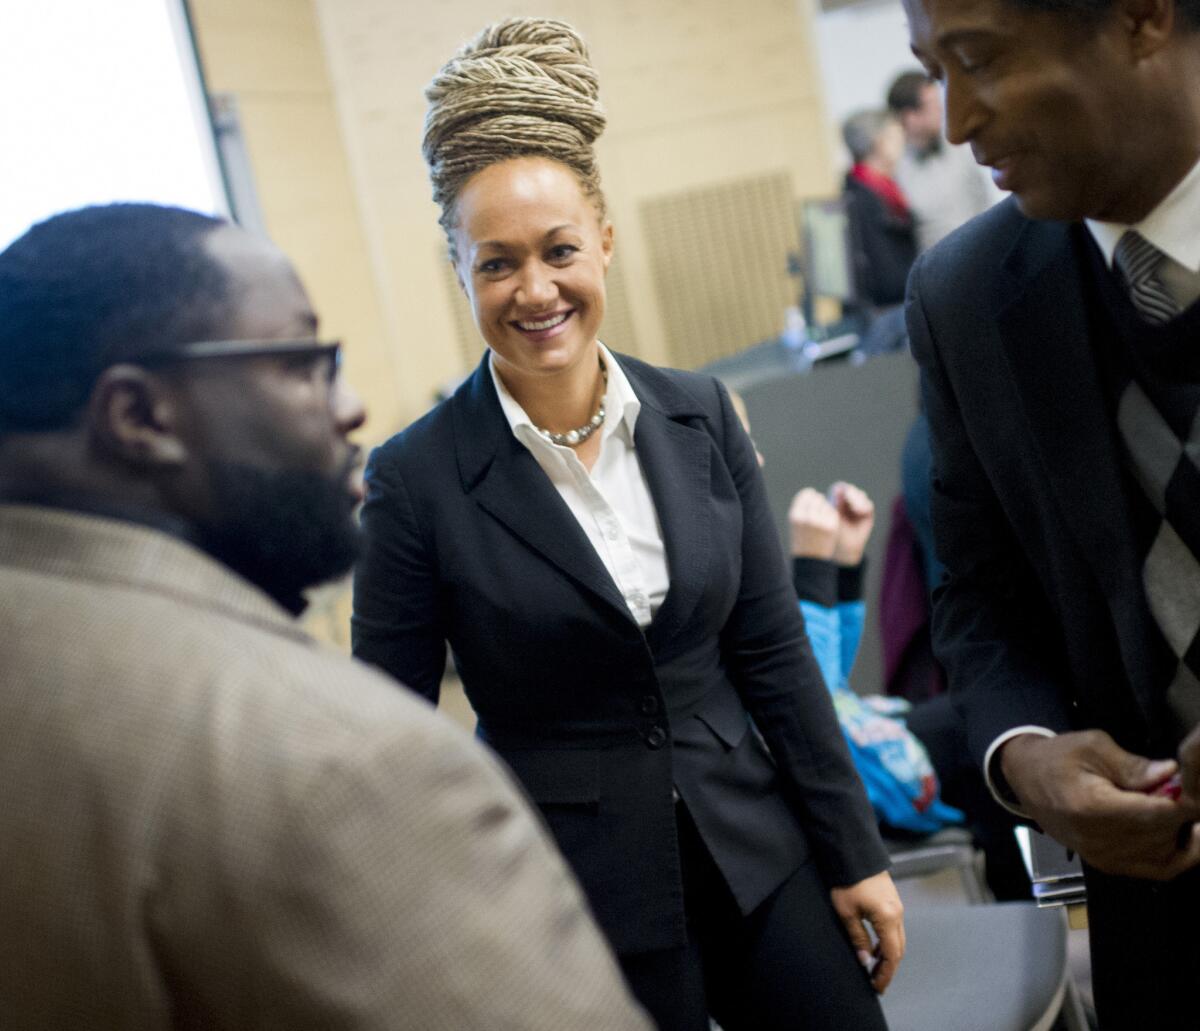 Rachel Dolezal, former president of the Spokane, Wash., chapter of the NAACP, in January.